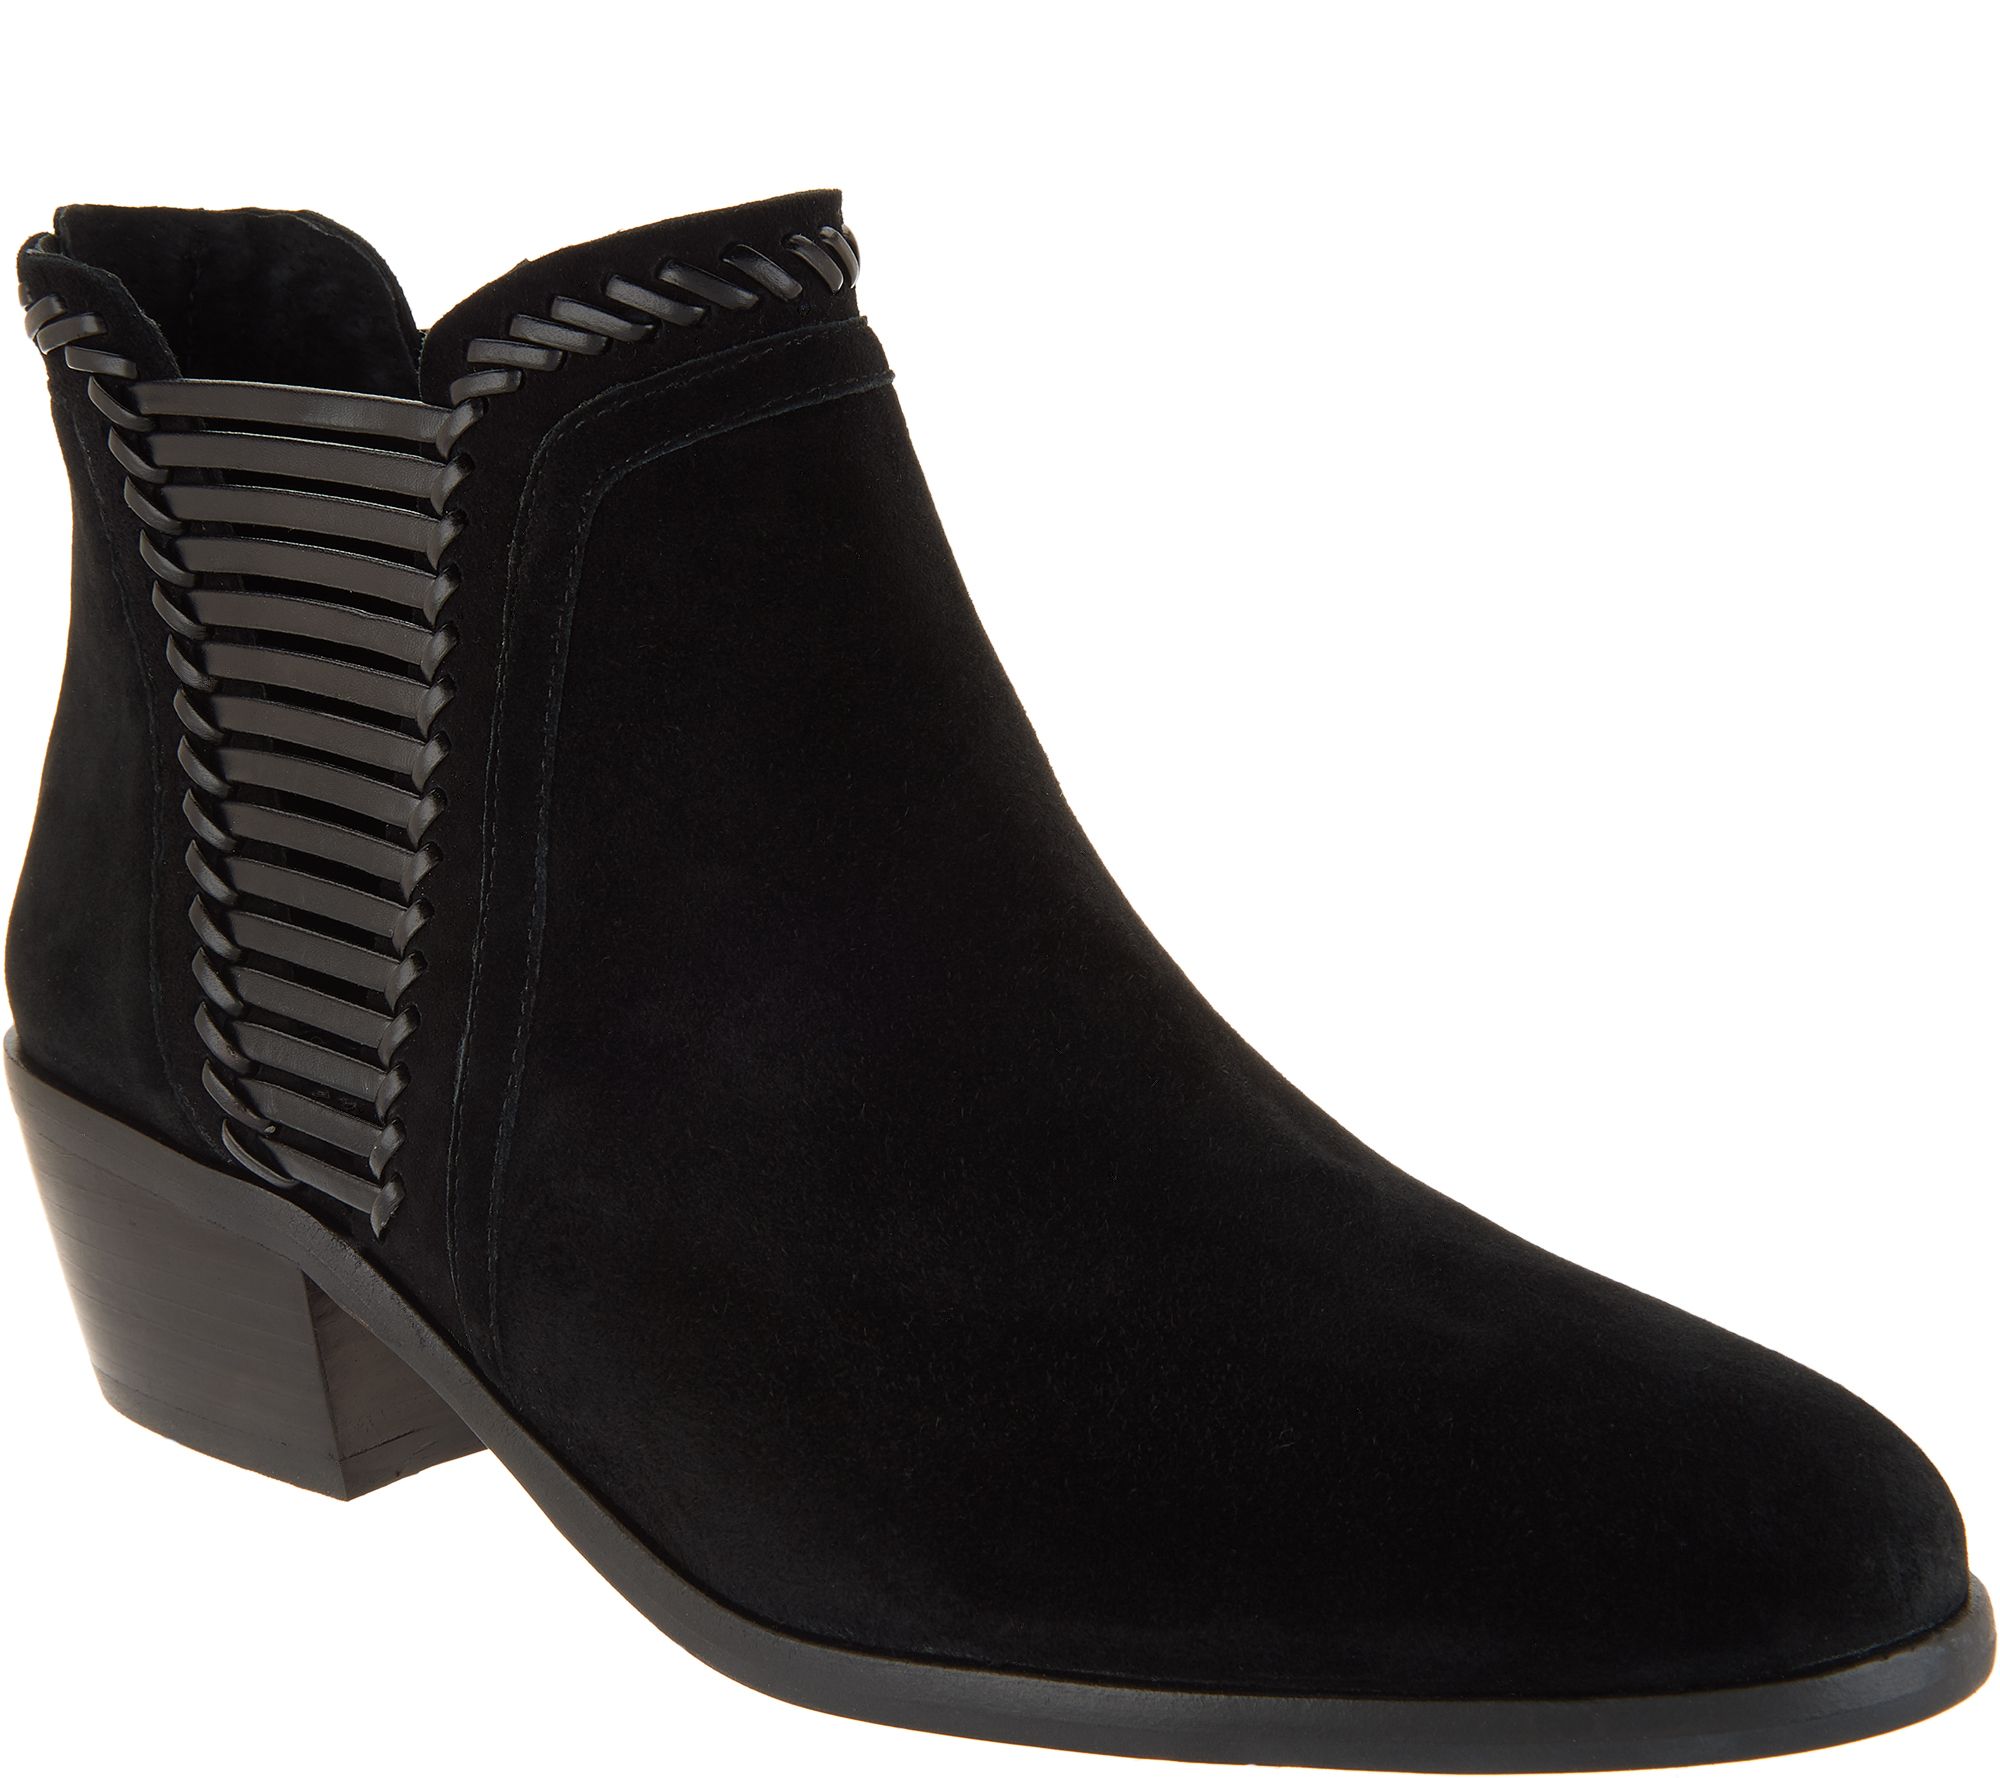 qvc vince camuto ankle boots